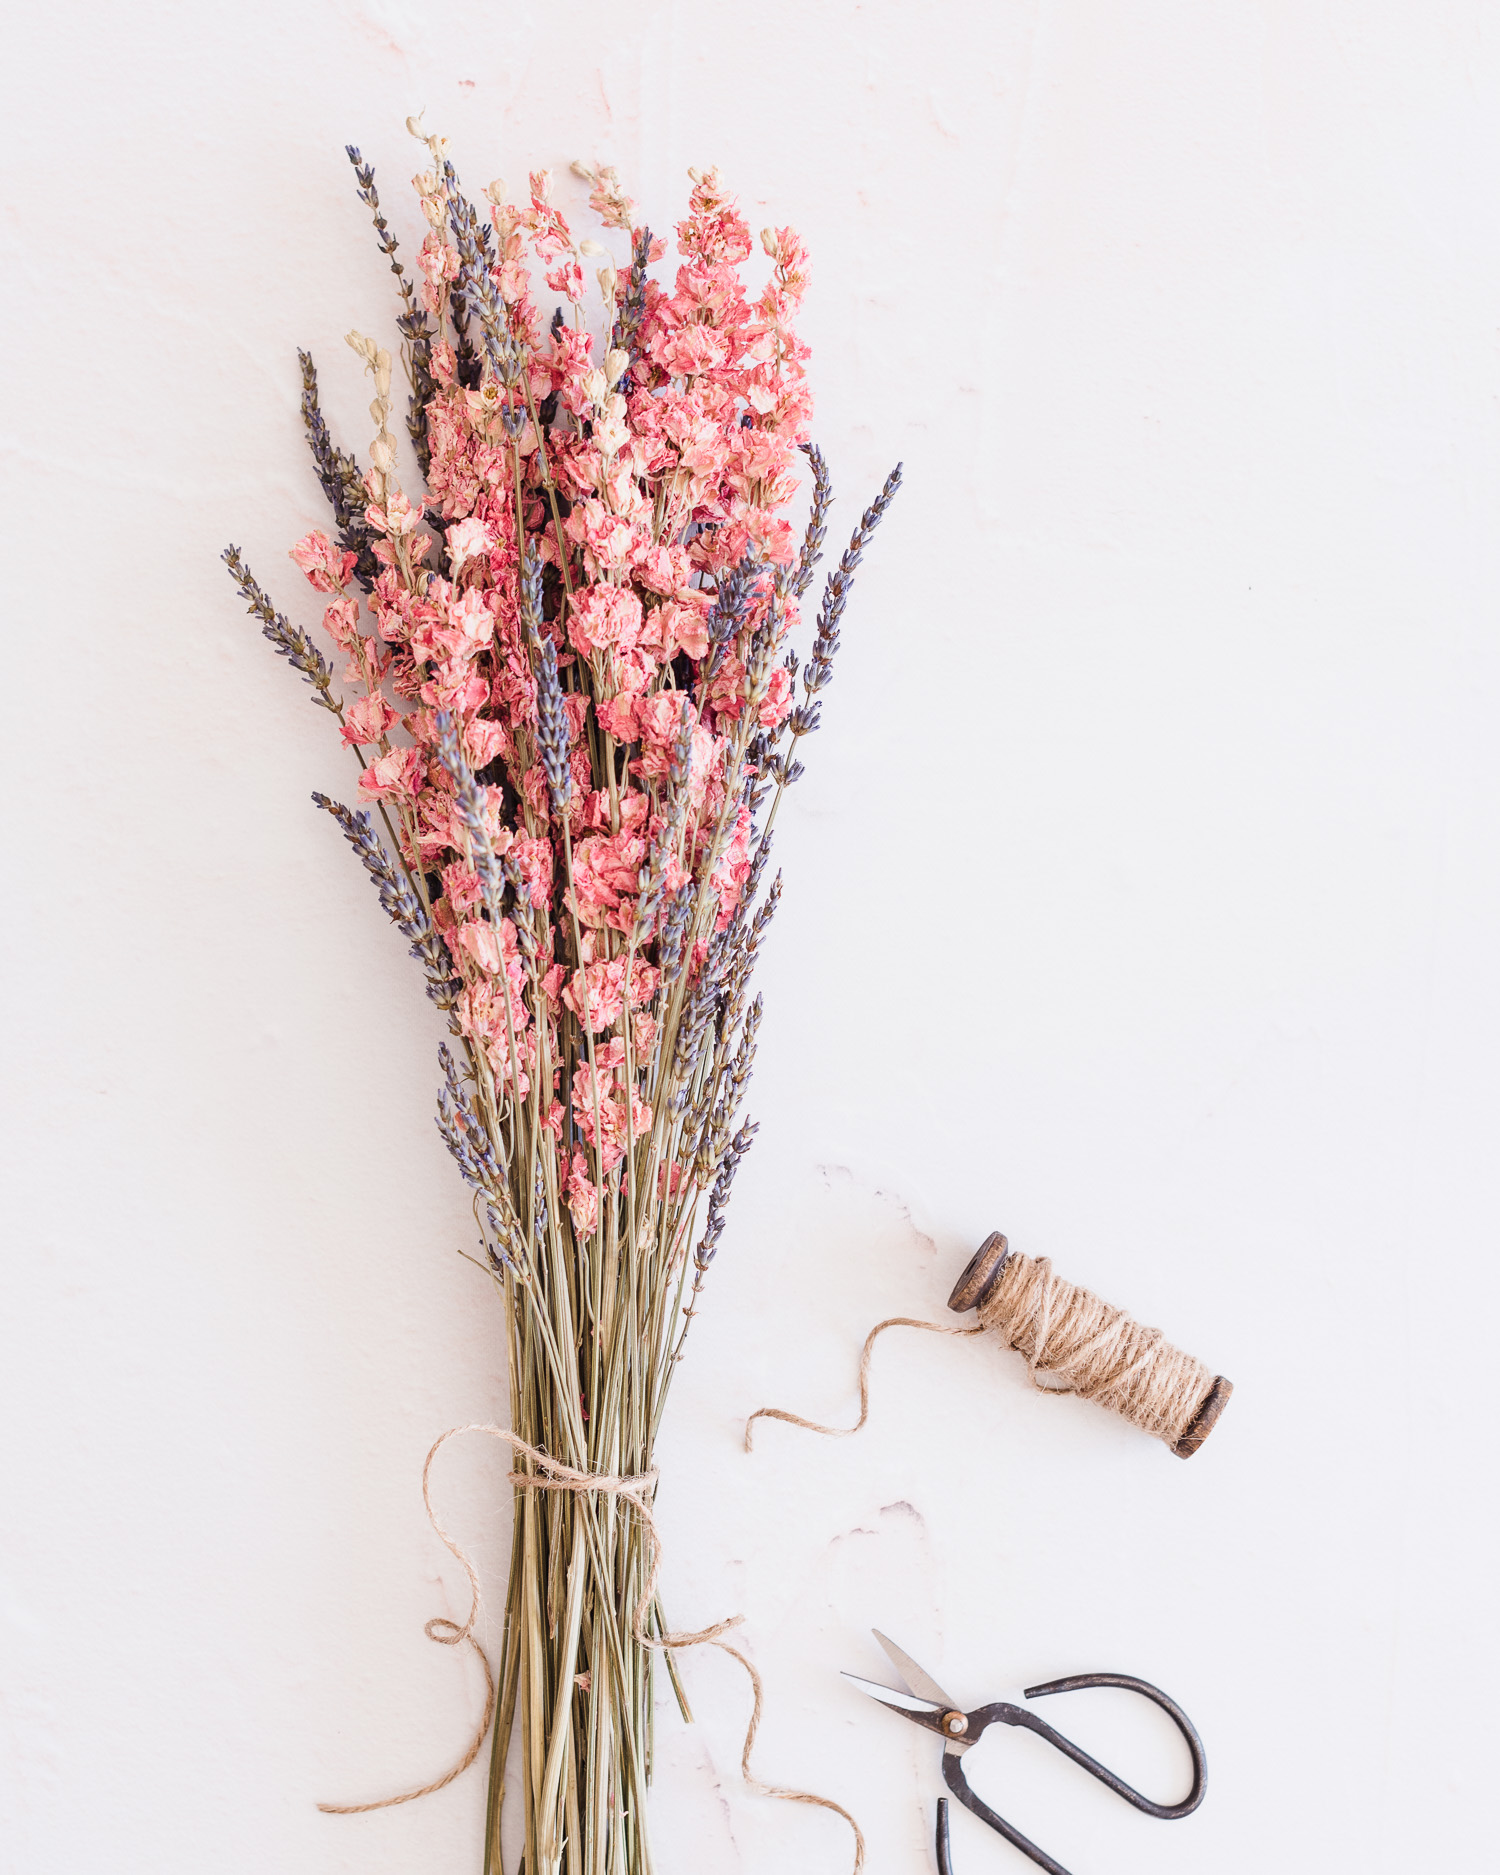 Vinyl Backdrop for Photography | Dried flowers, twine, scissors